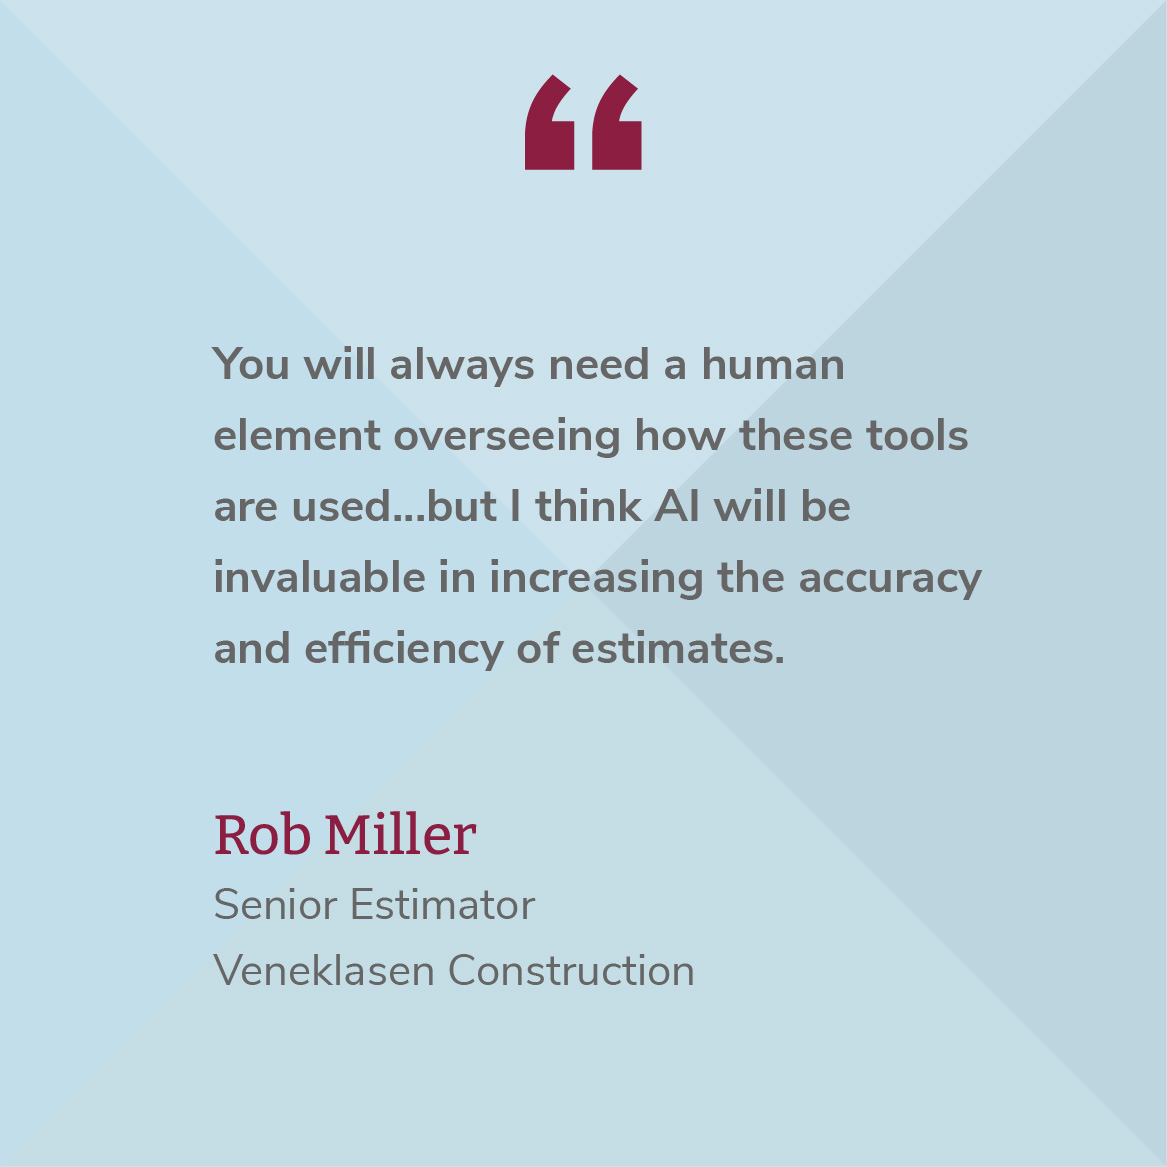 quote from Rob Miller, Sr. Estimator